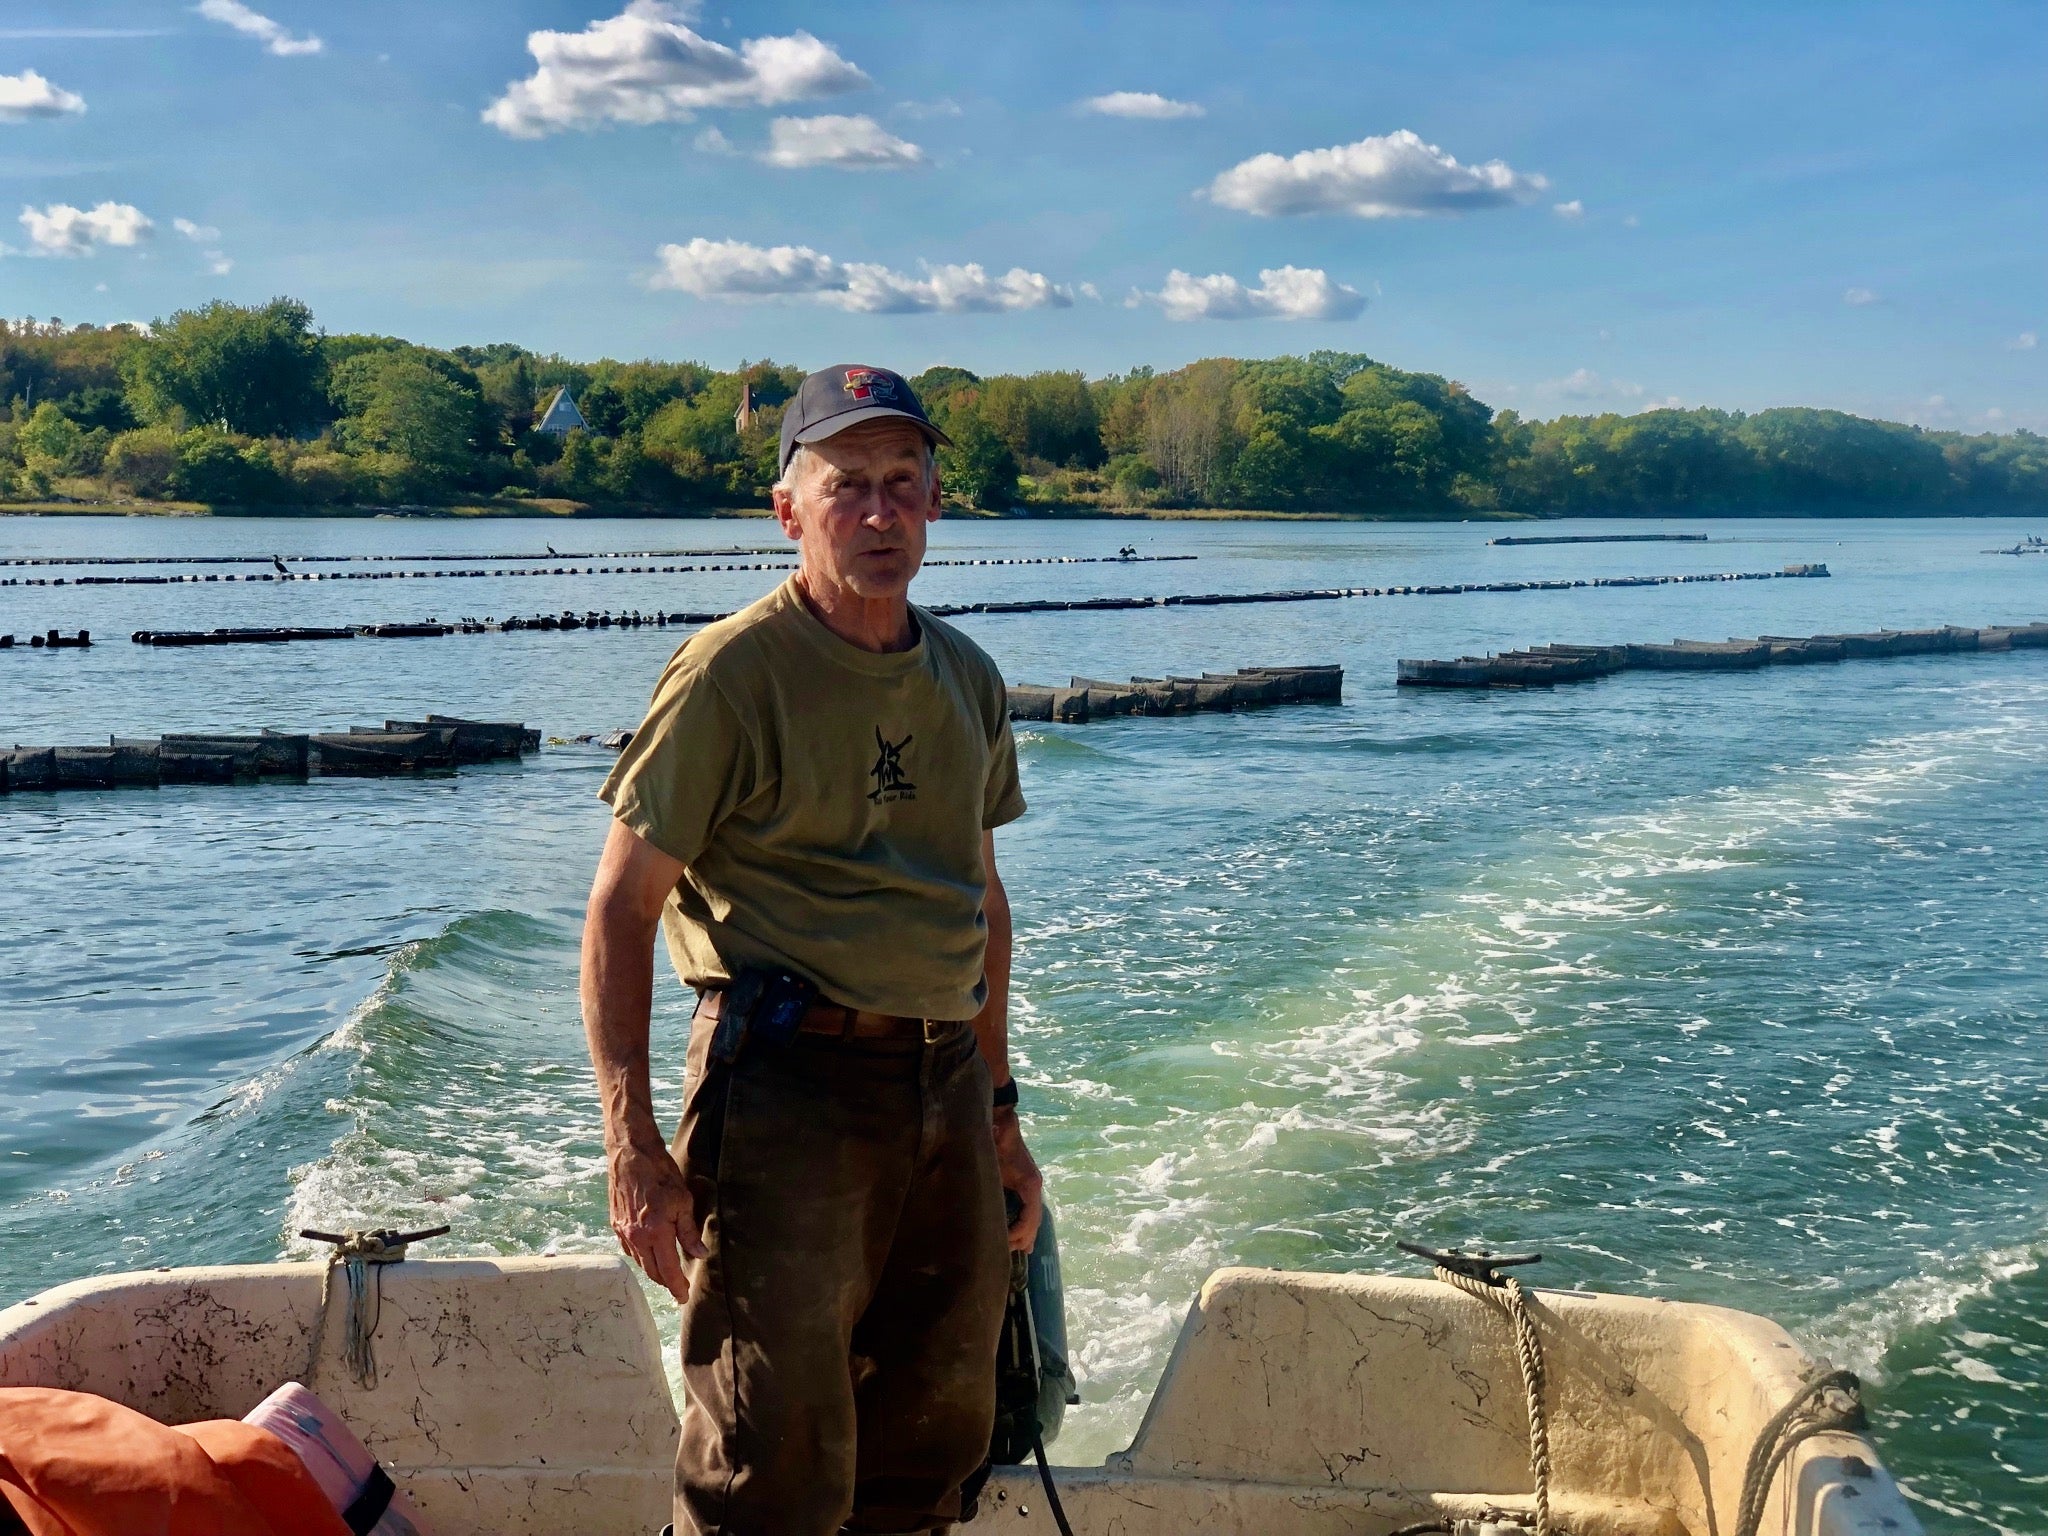 Oyster Farm manager, Ralph Hamill on the skiff.